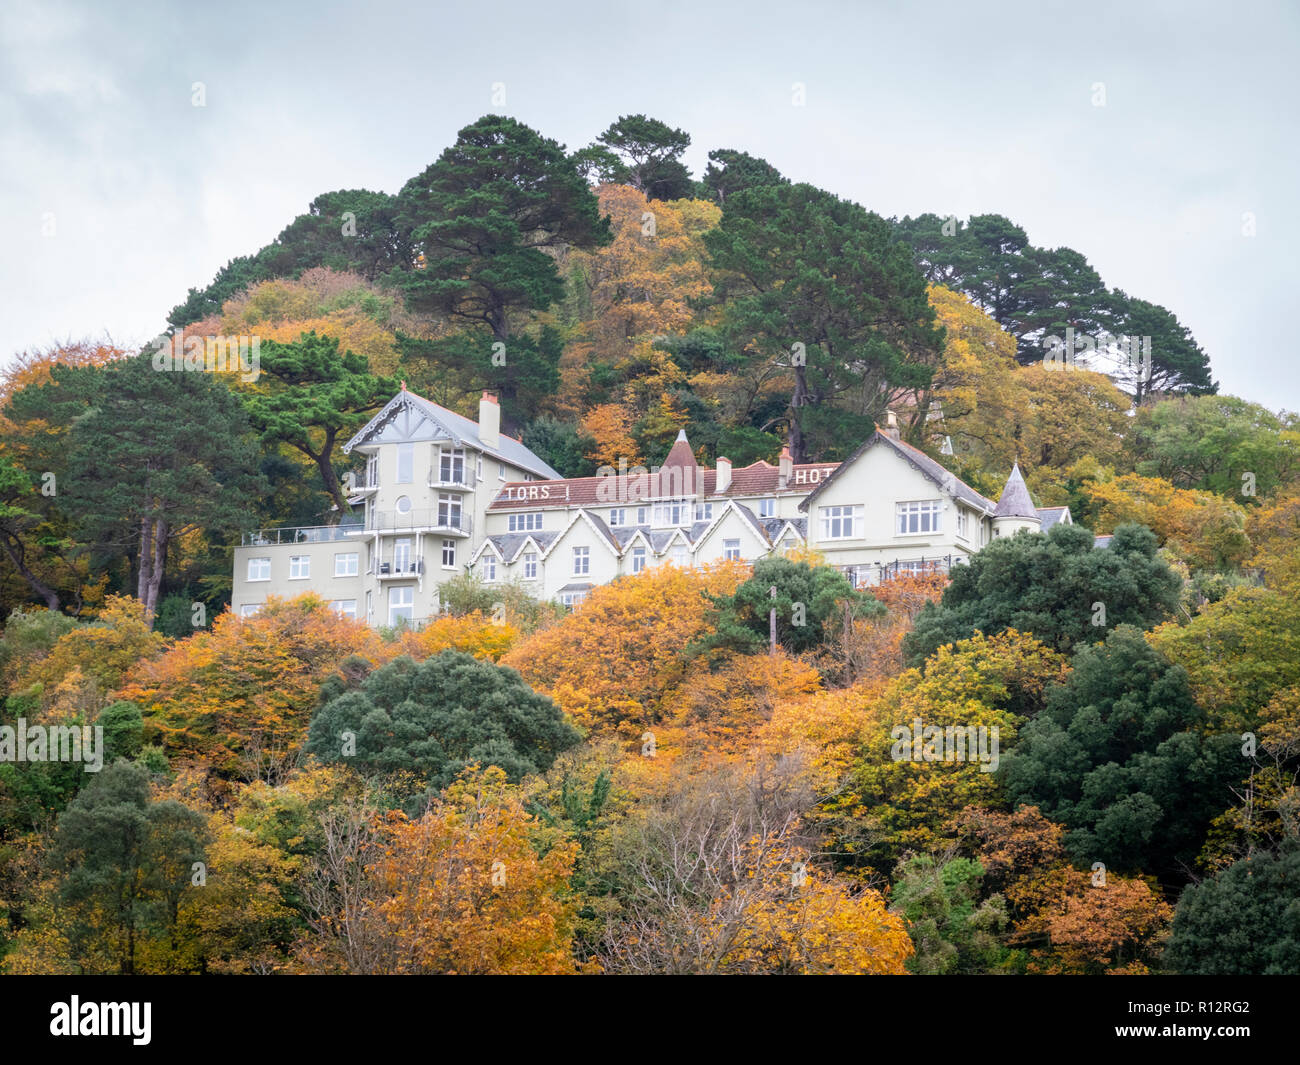 The Tors Hotel on the steep valley sides at Lynmouth Devon UK in autumn Stock Photo